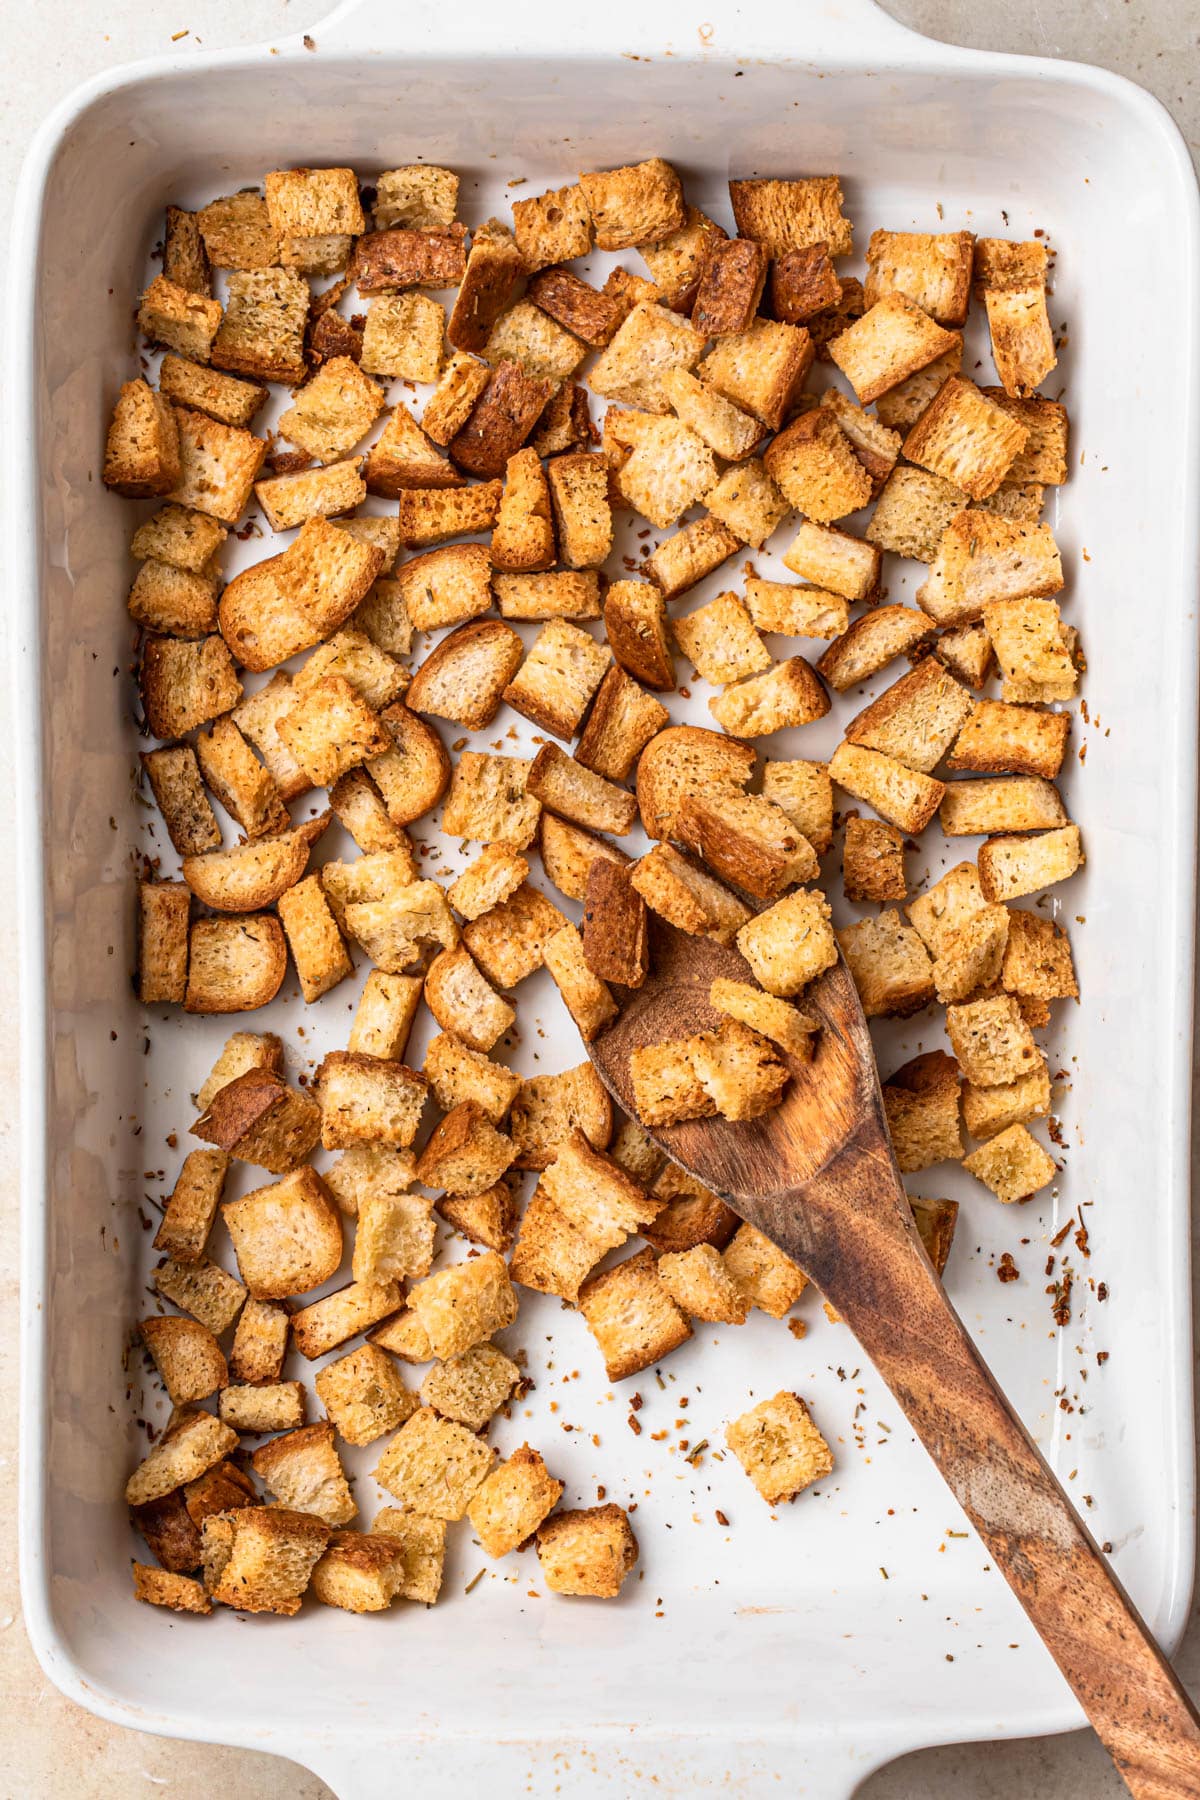 Golden brown, gluten free croutons in a white baking dish with a wooden spoon.